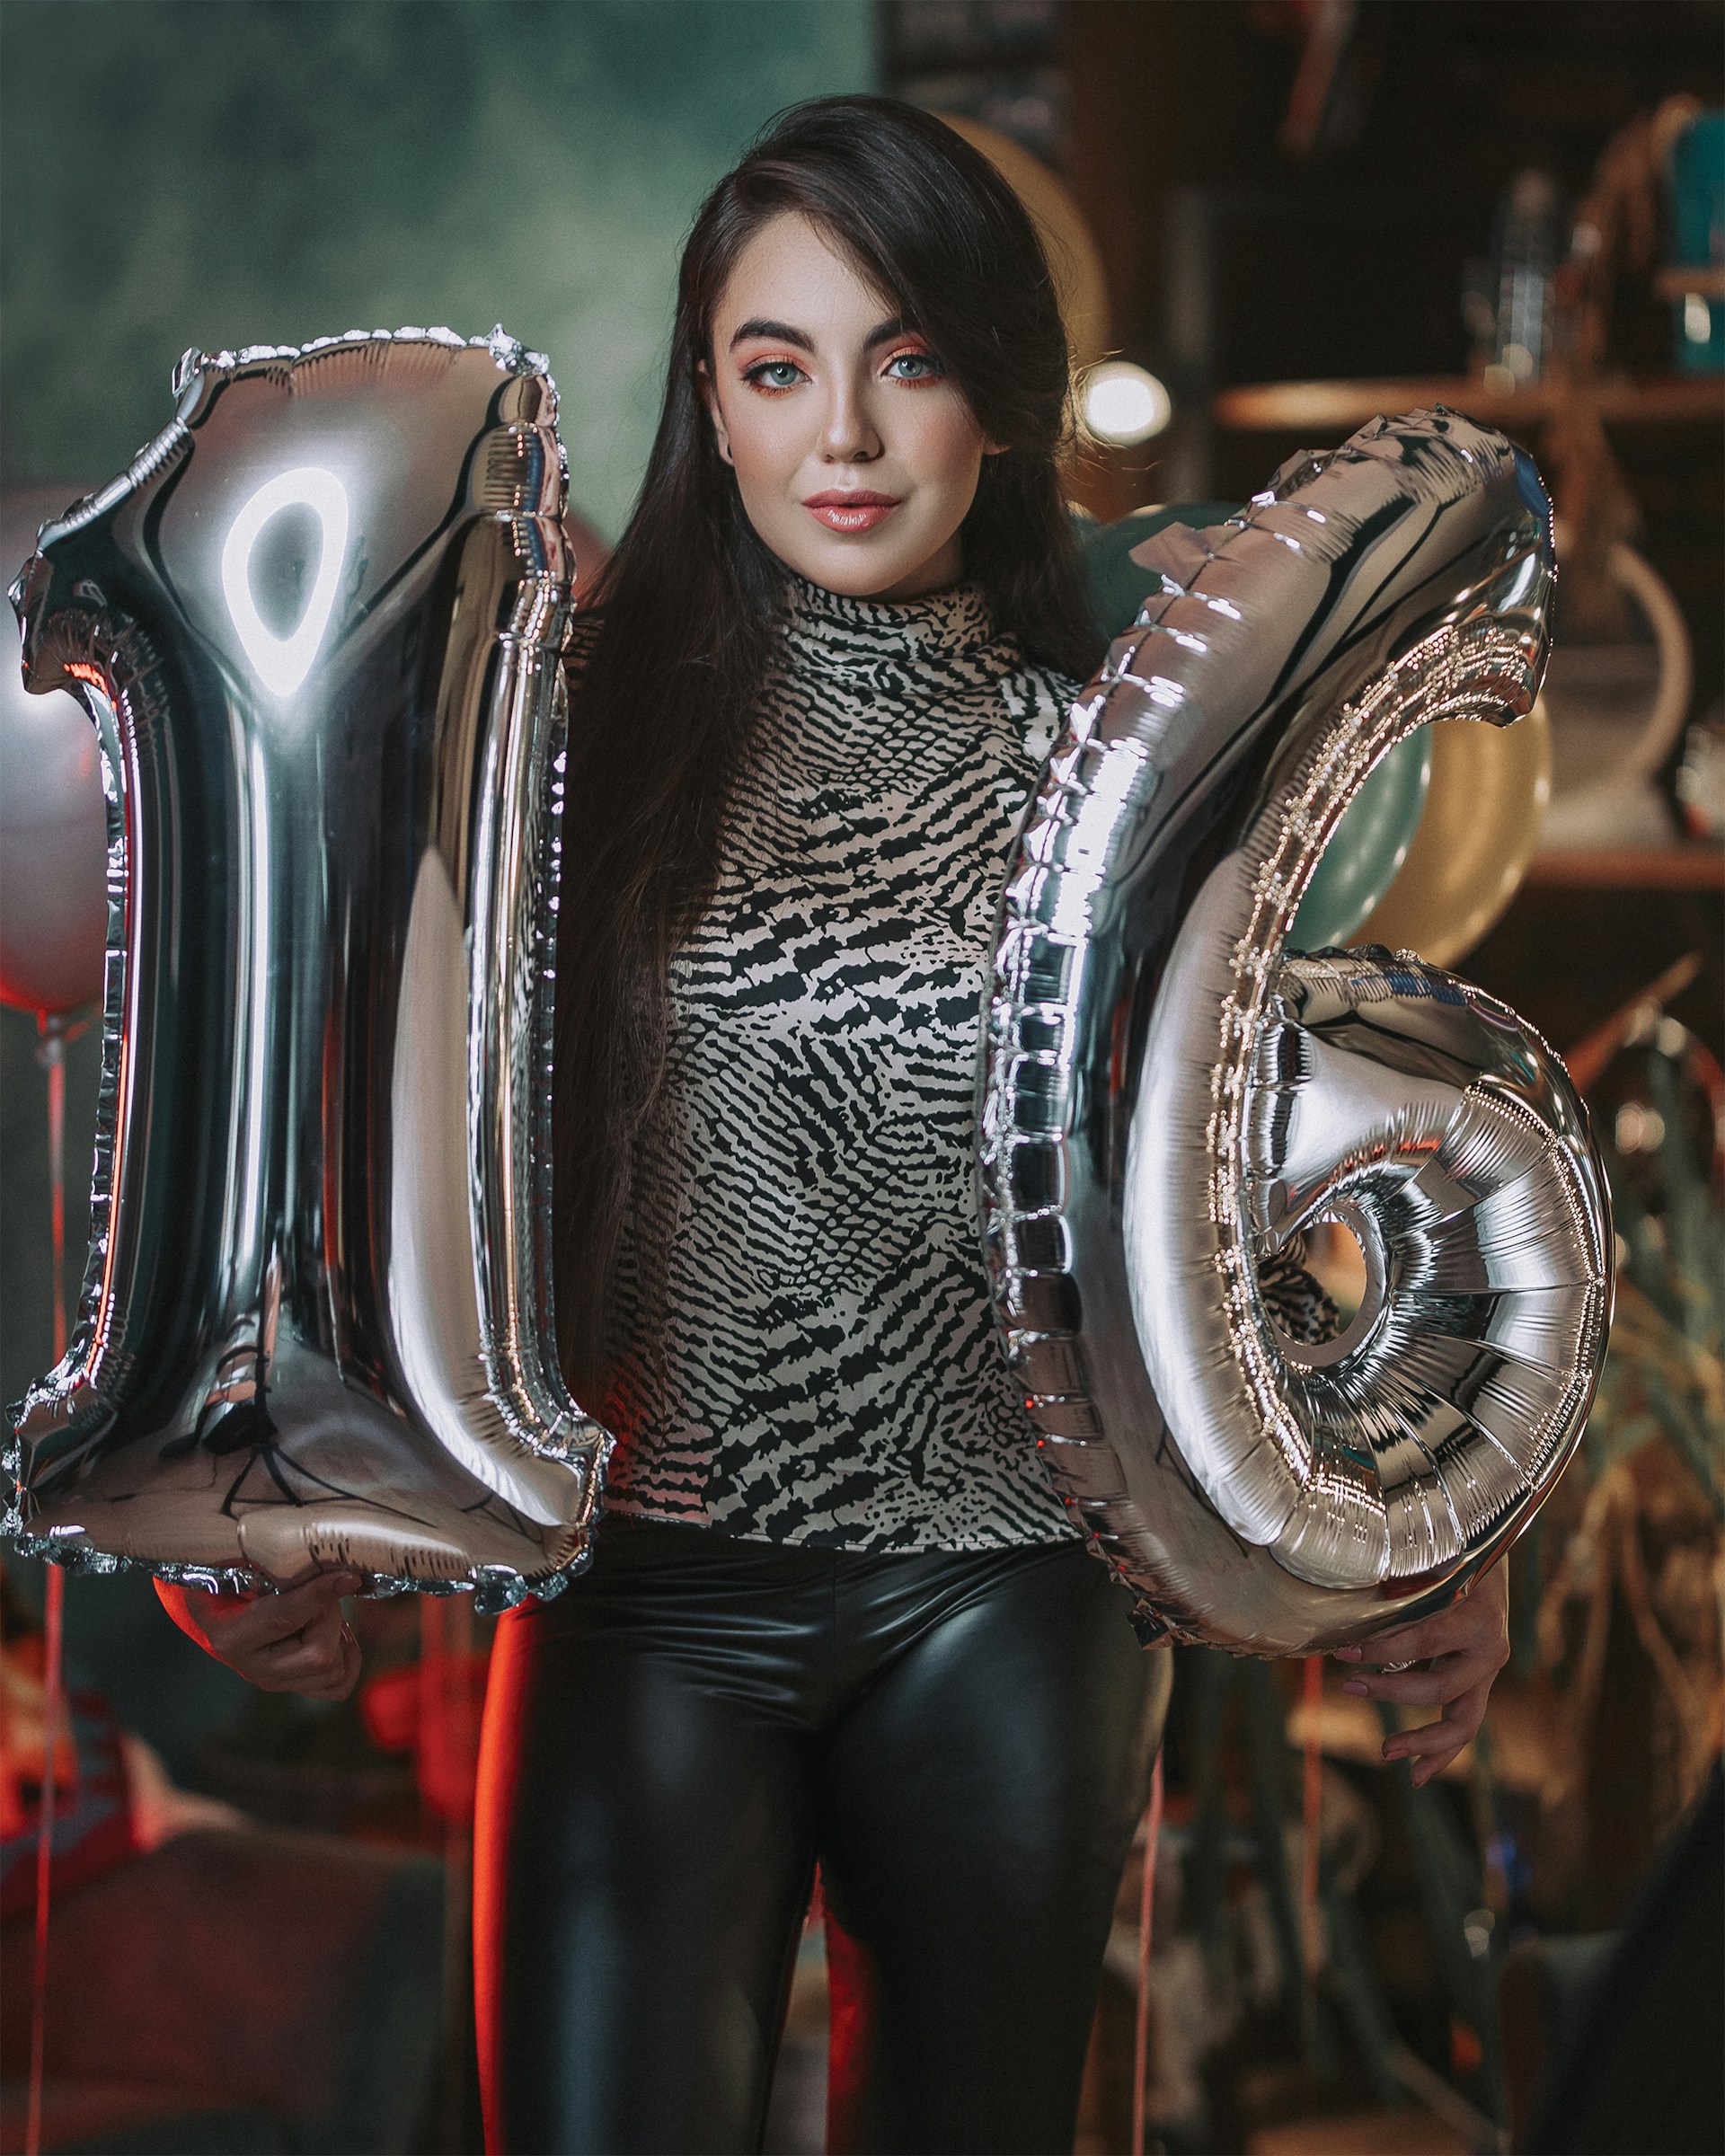 A girl holding silver balloons | Source: Unsplash